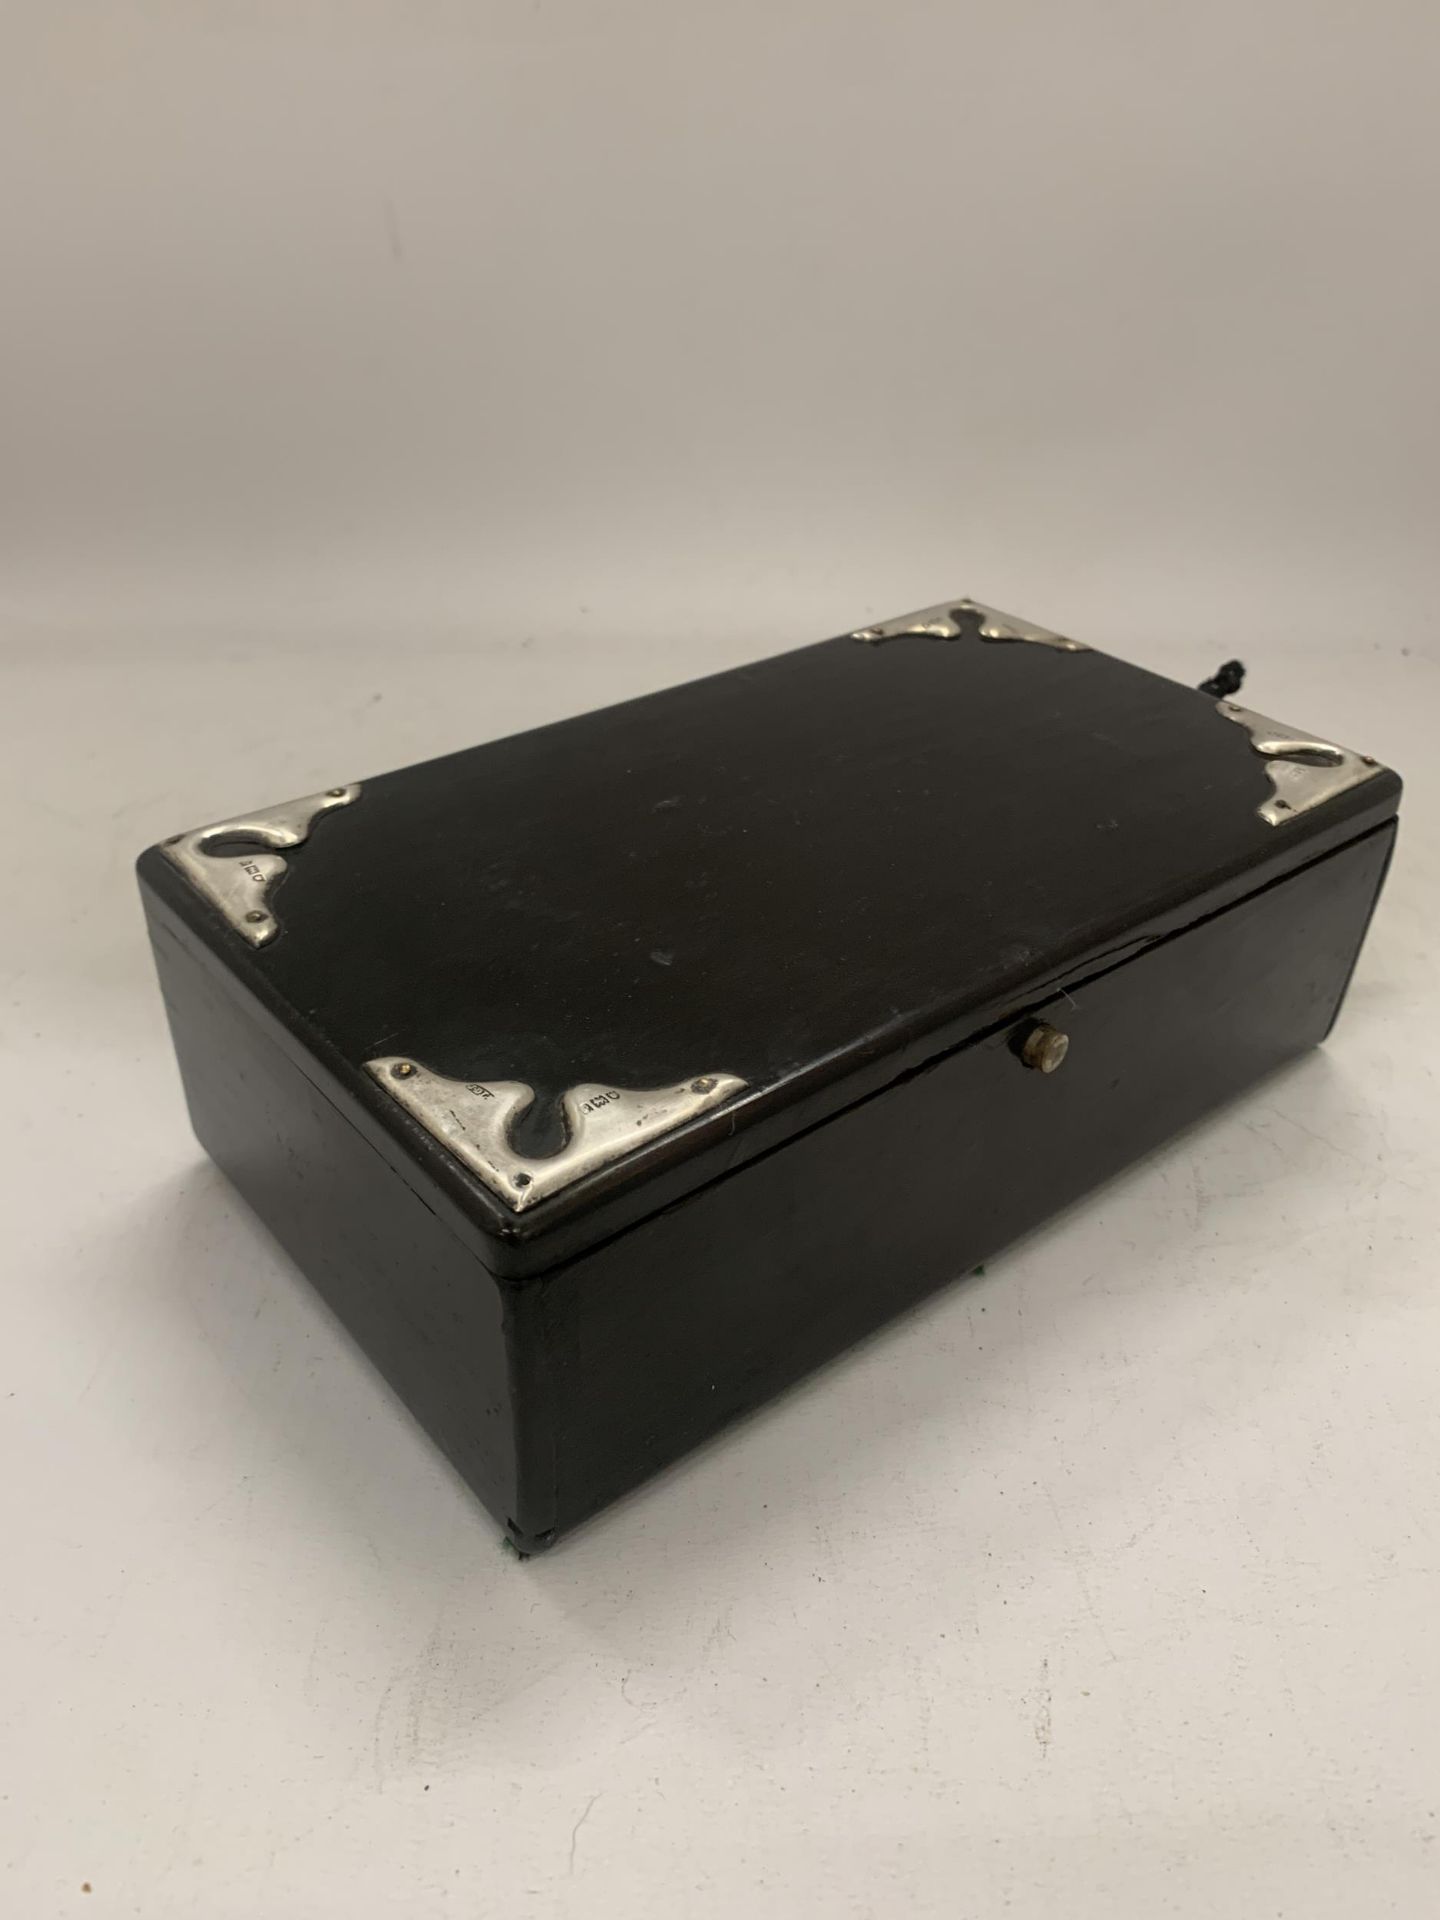 A VINTAGE EBONY BOX WITH HALLMARKED LONDON SILVER EDGES - Image 3 of 3